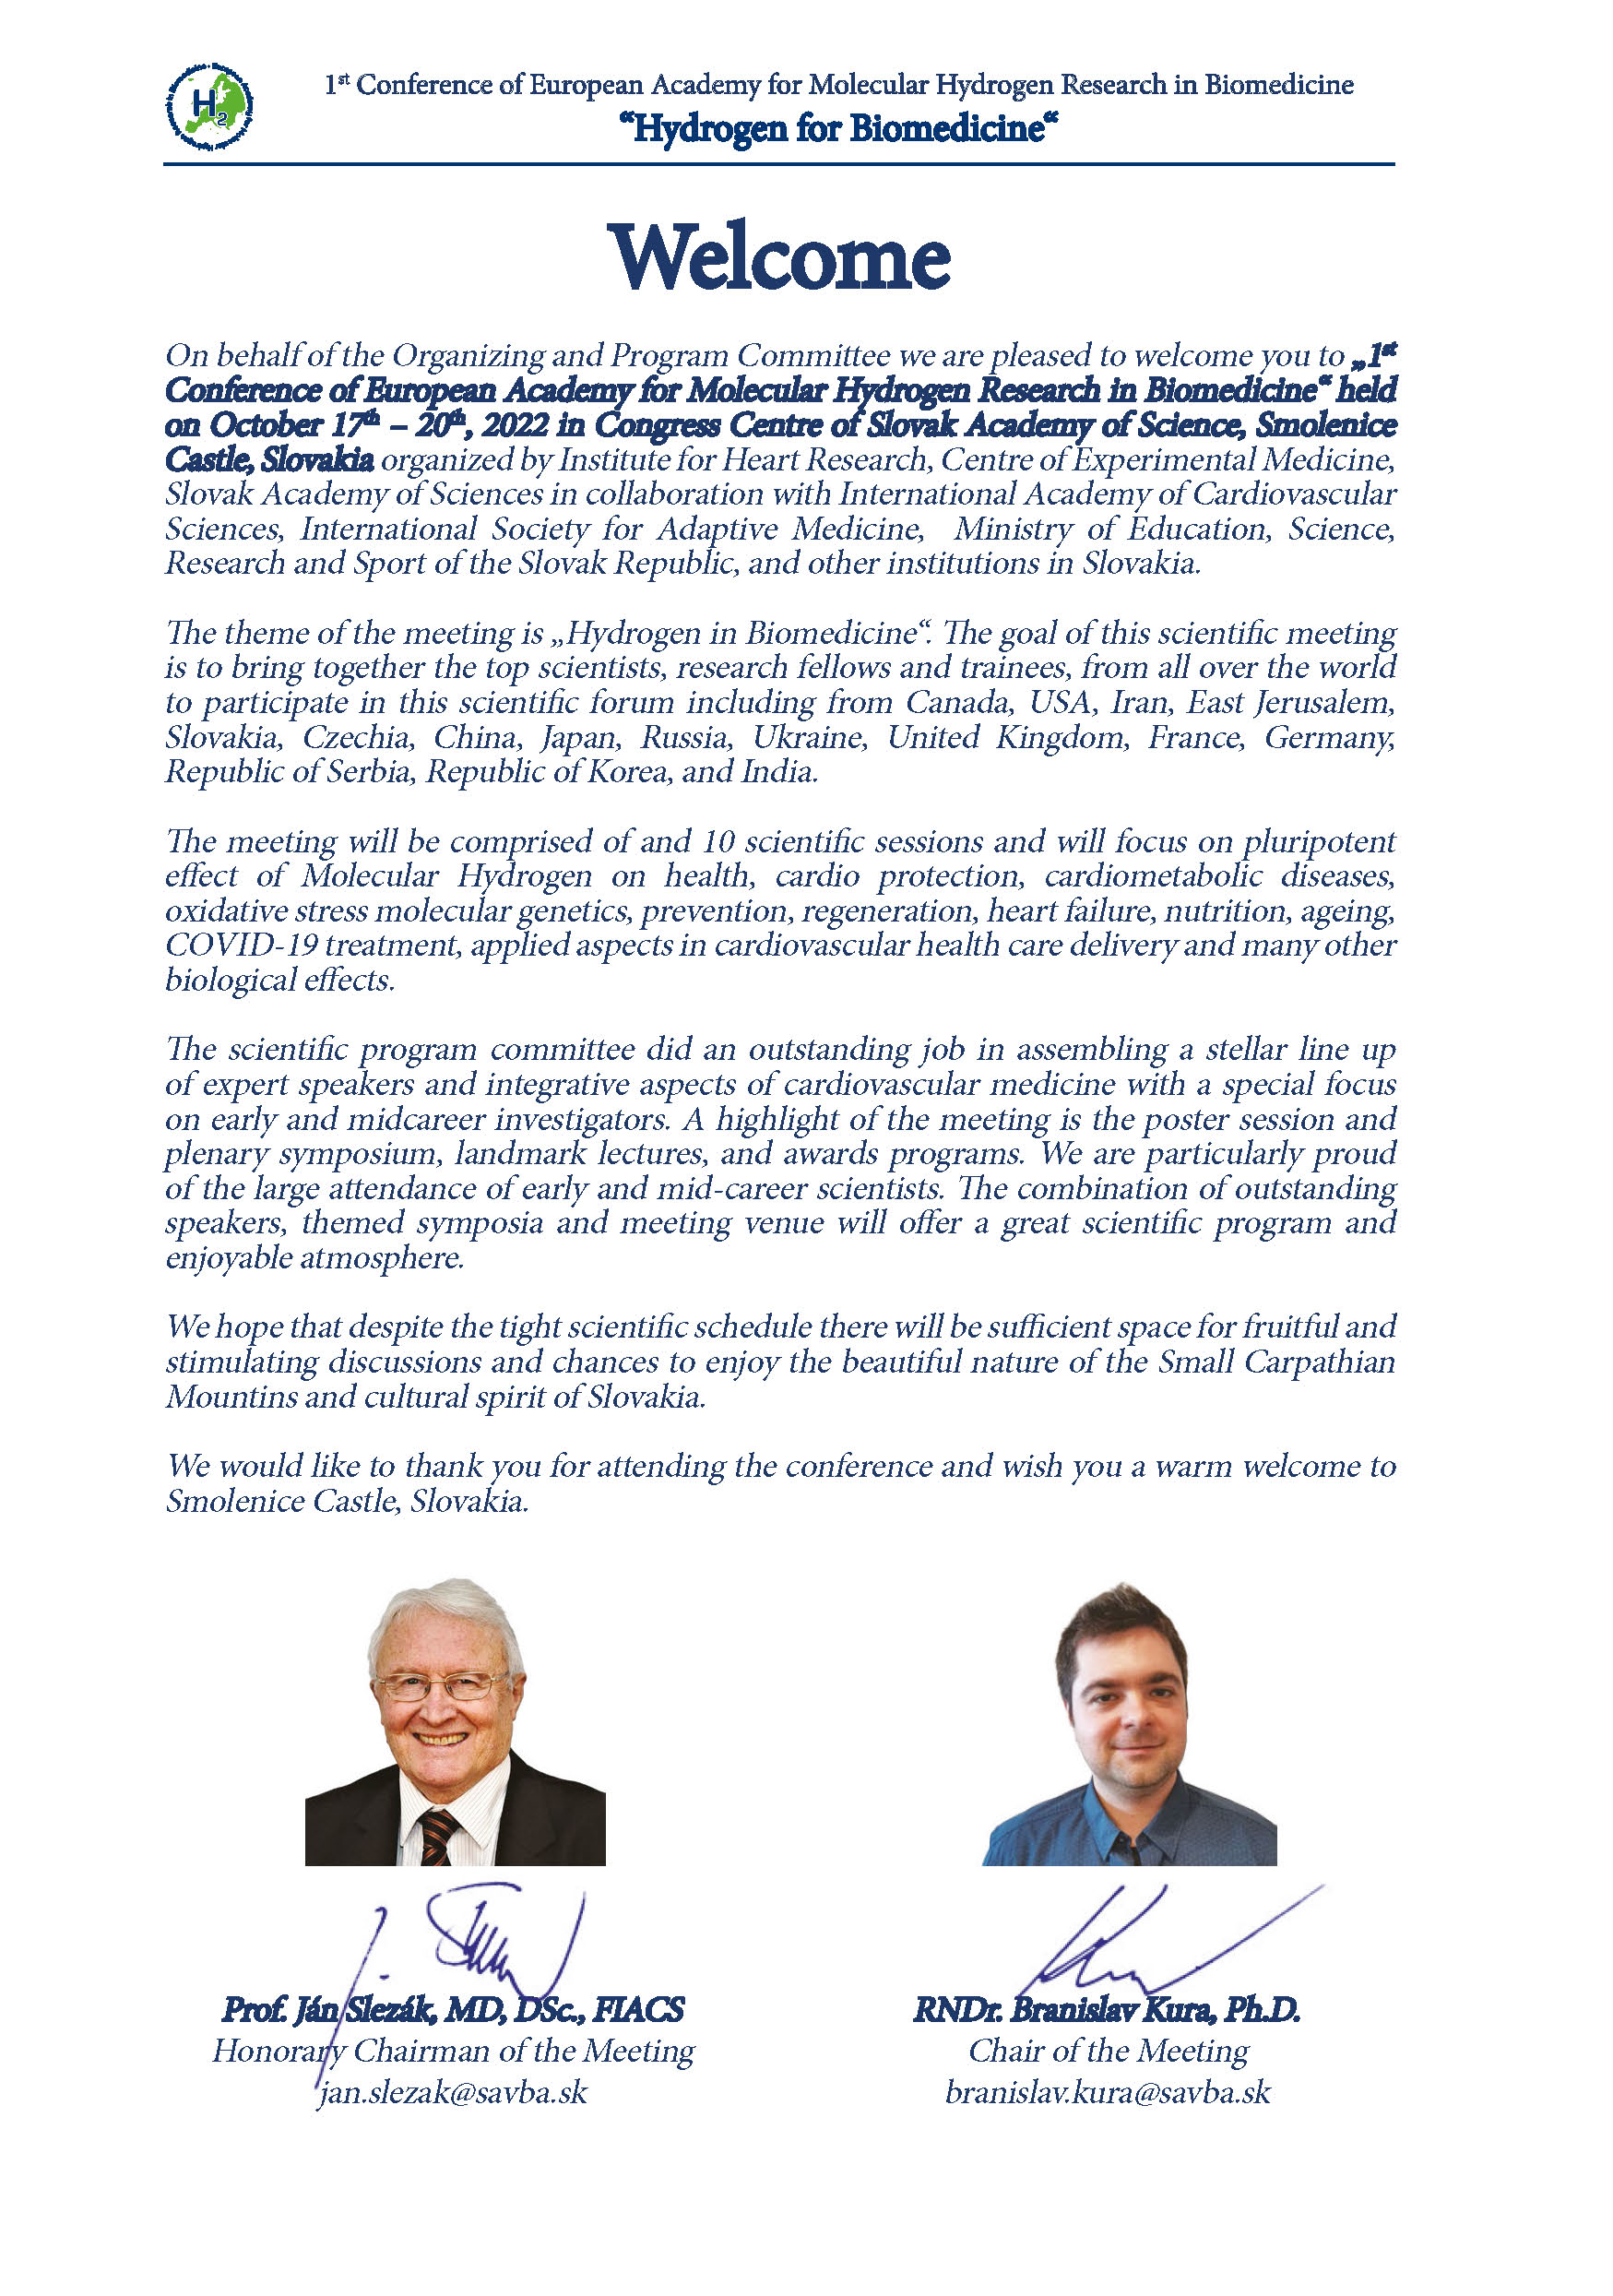 1st conference of European Academy for Molecular Hydrogen Research in Biomedicine “Hydrogen for Biomedicine“